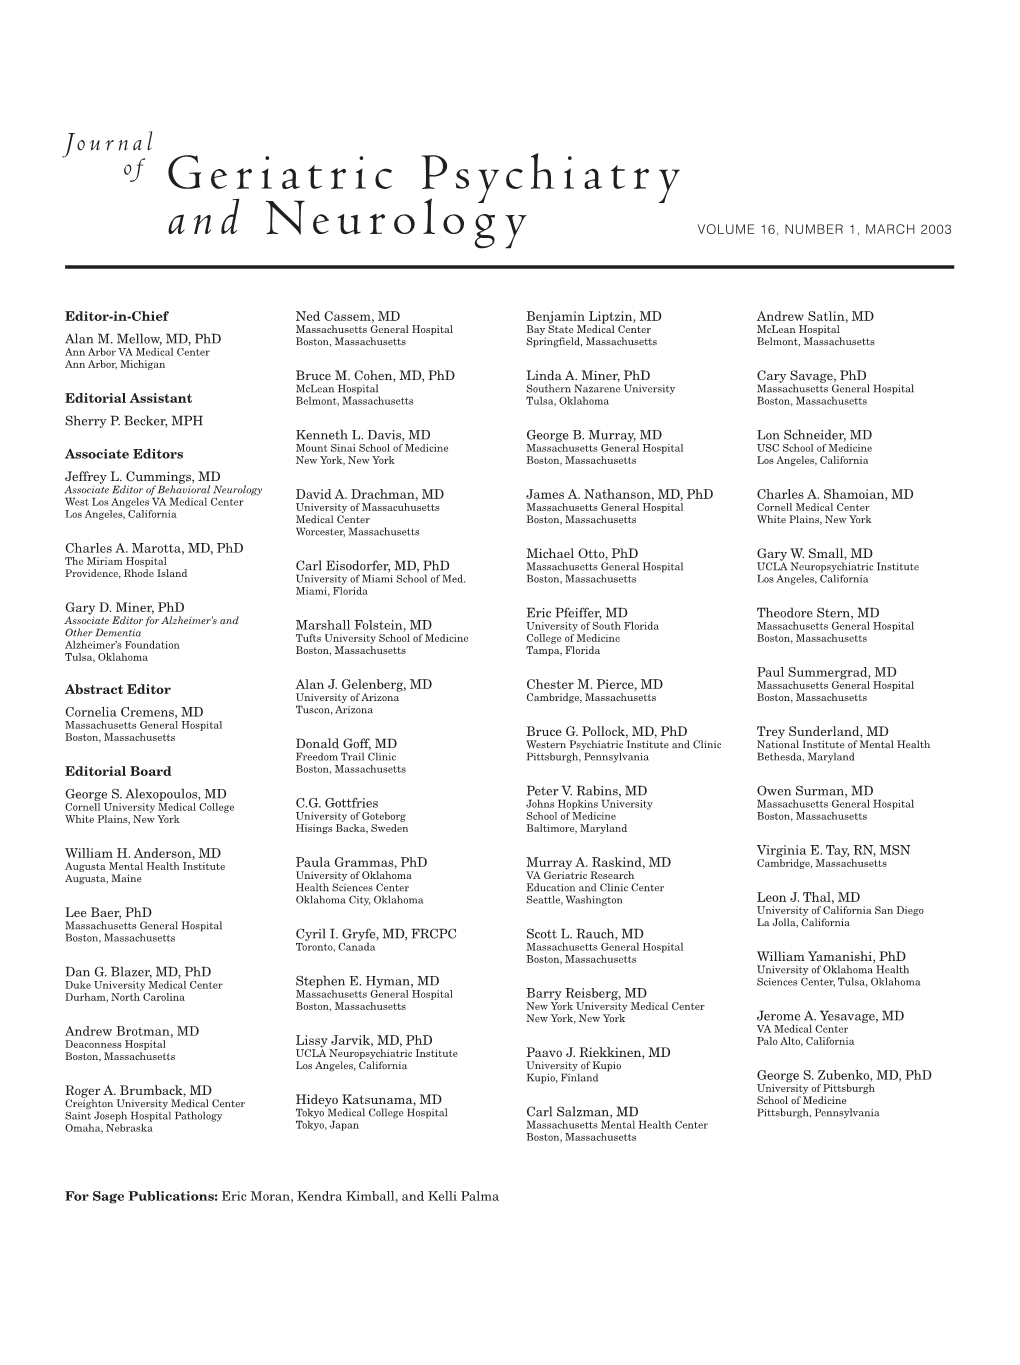 Of Geriatric Psychiatry and Neurology VOLUME 16, NUMBER 1, MARCH 2003